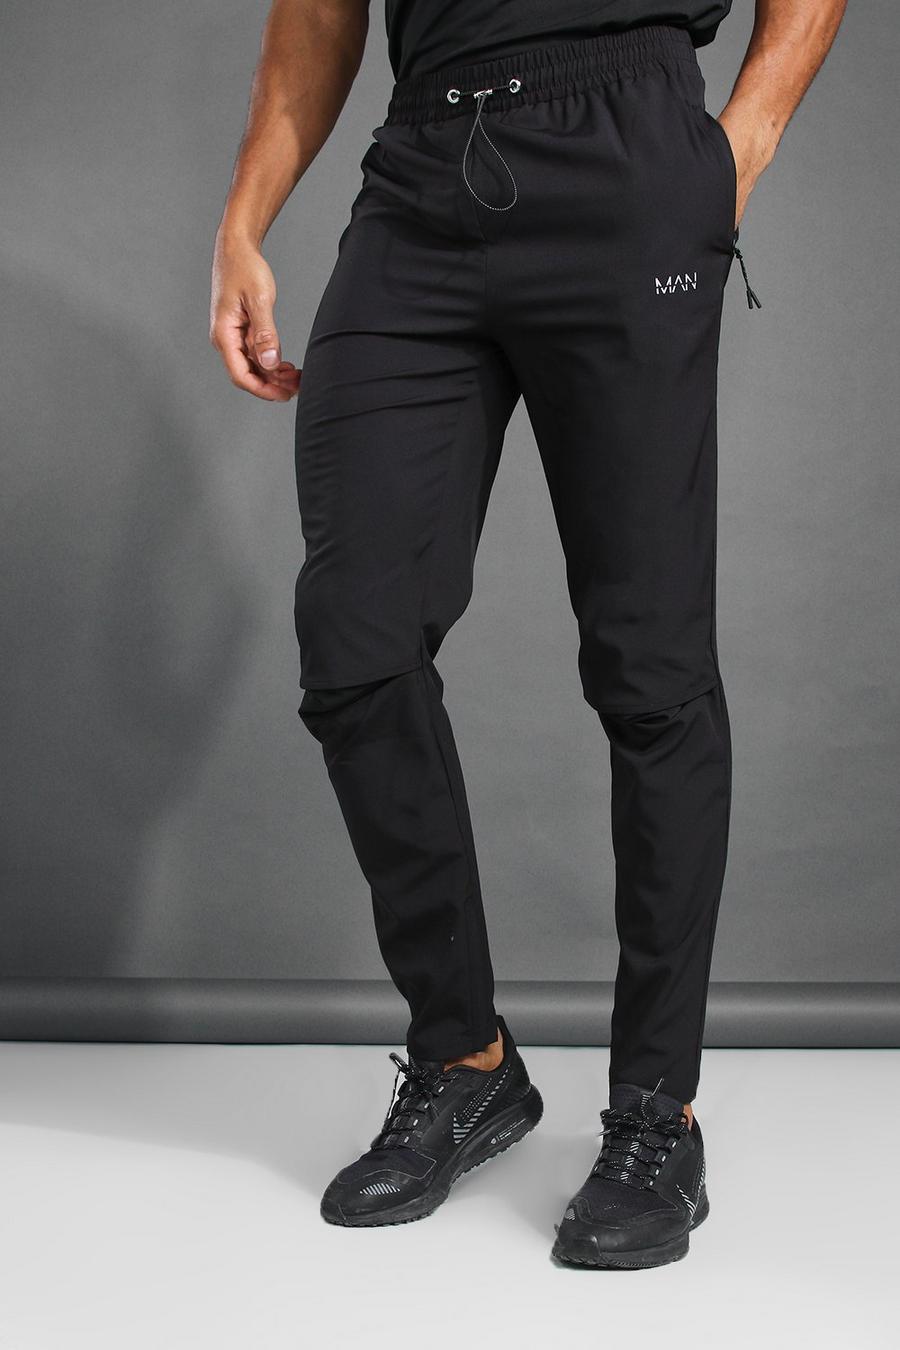 Black Man Active Gym Tapered Fit Sweatpant